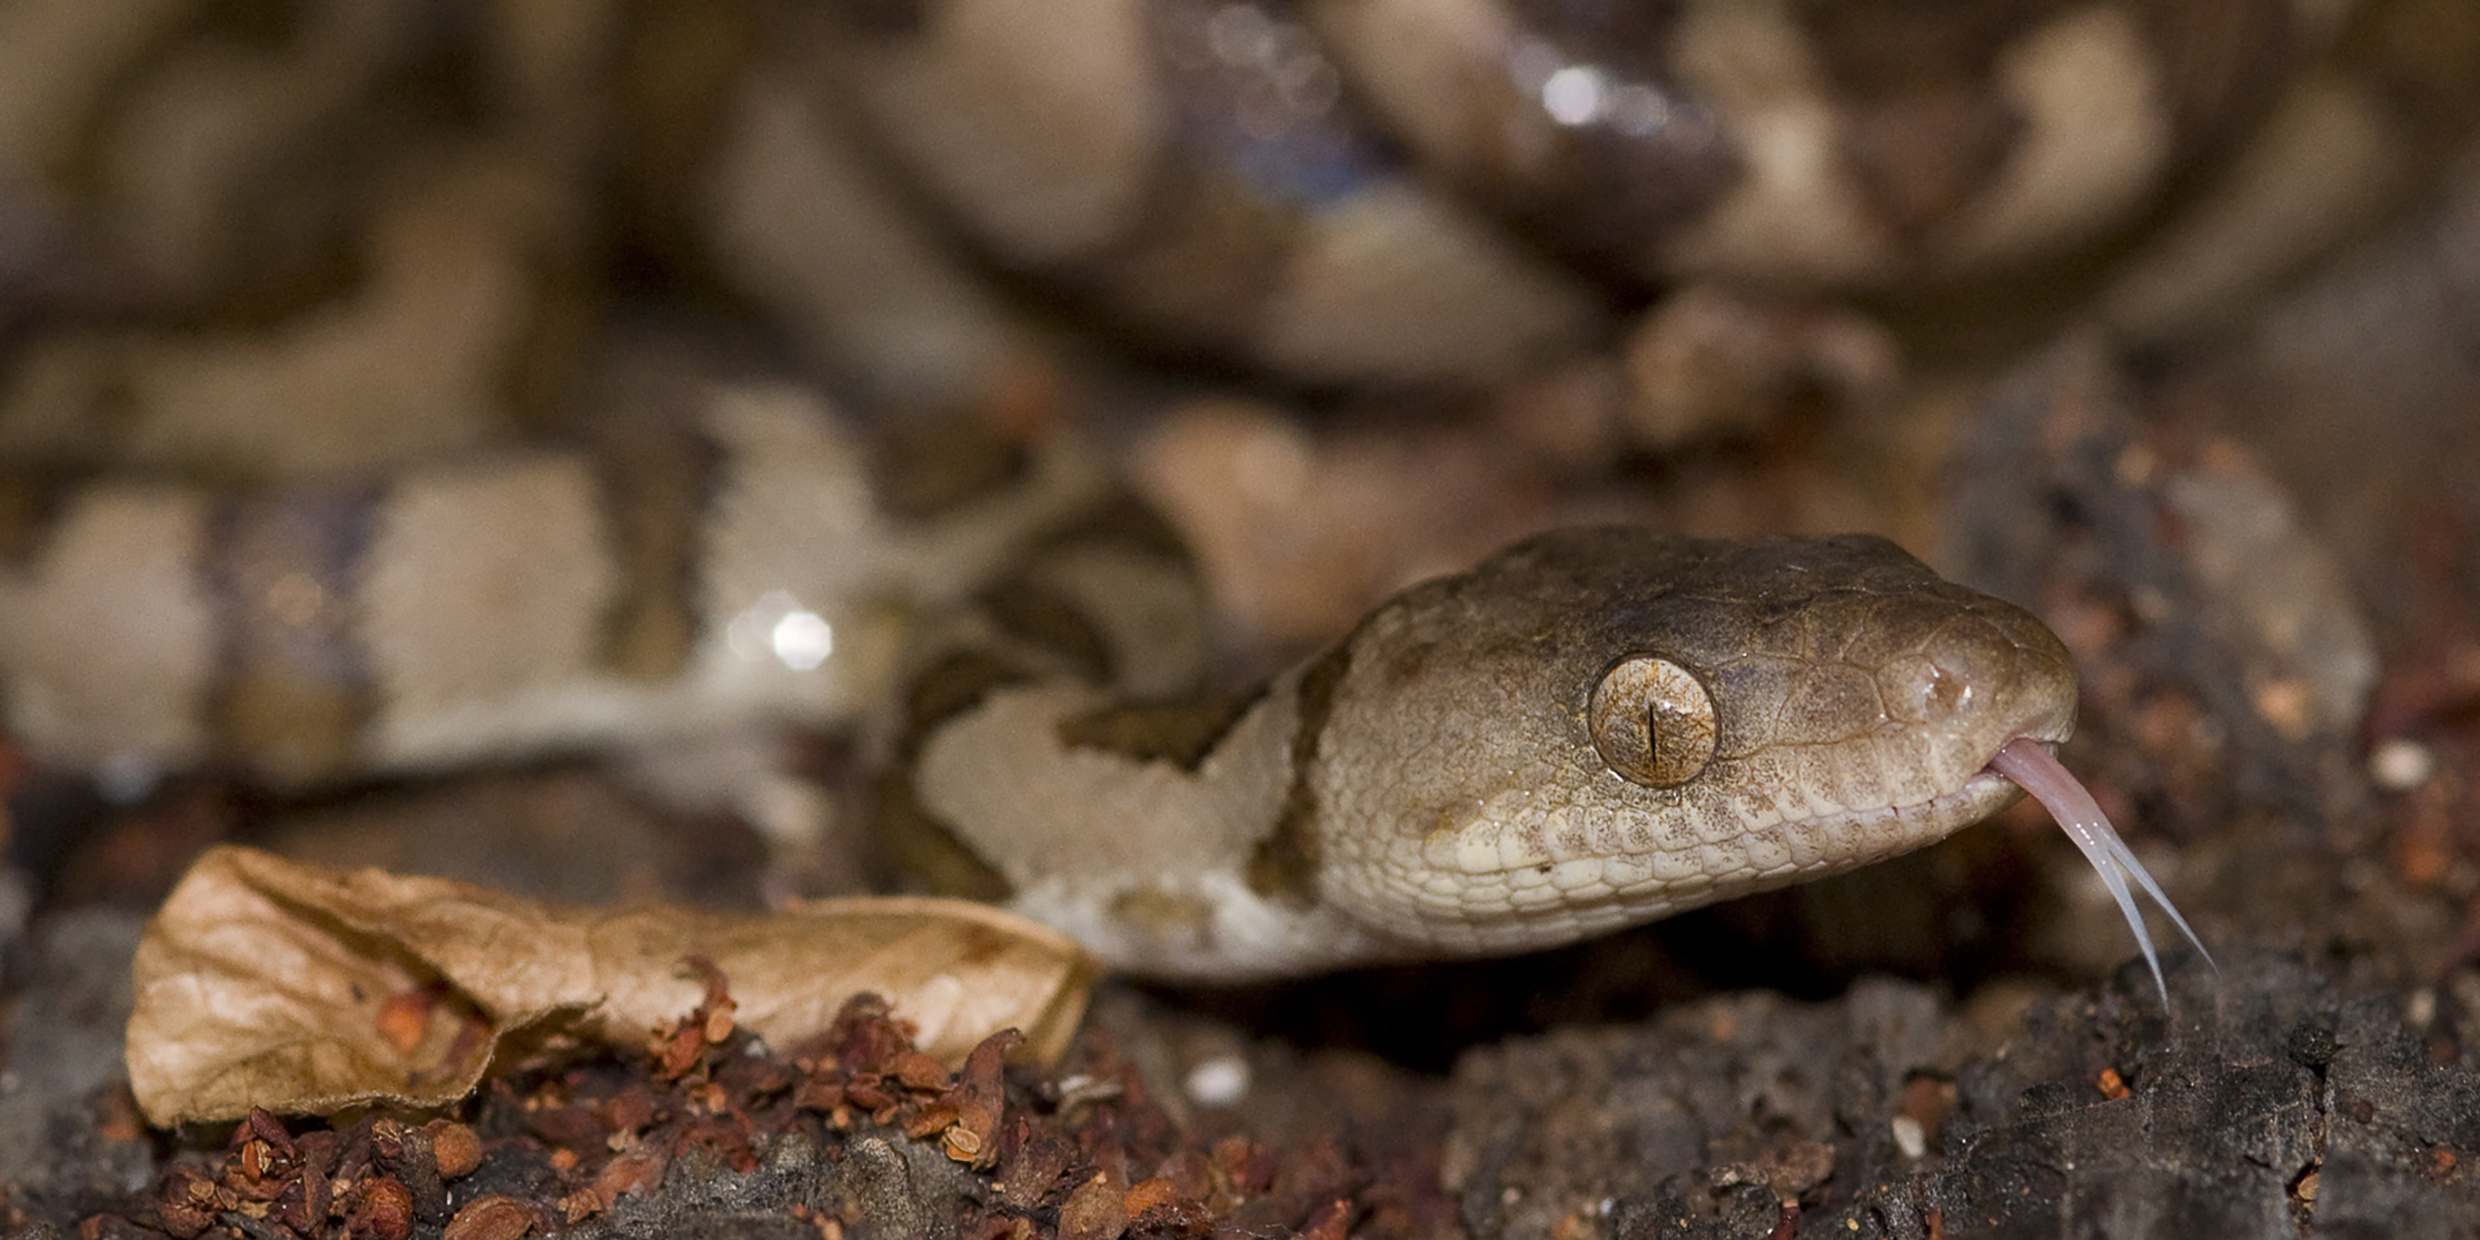 Close-up image of a snake with an extended tongue